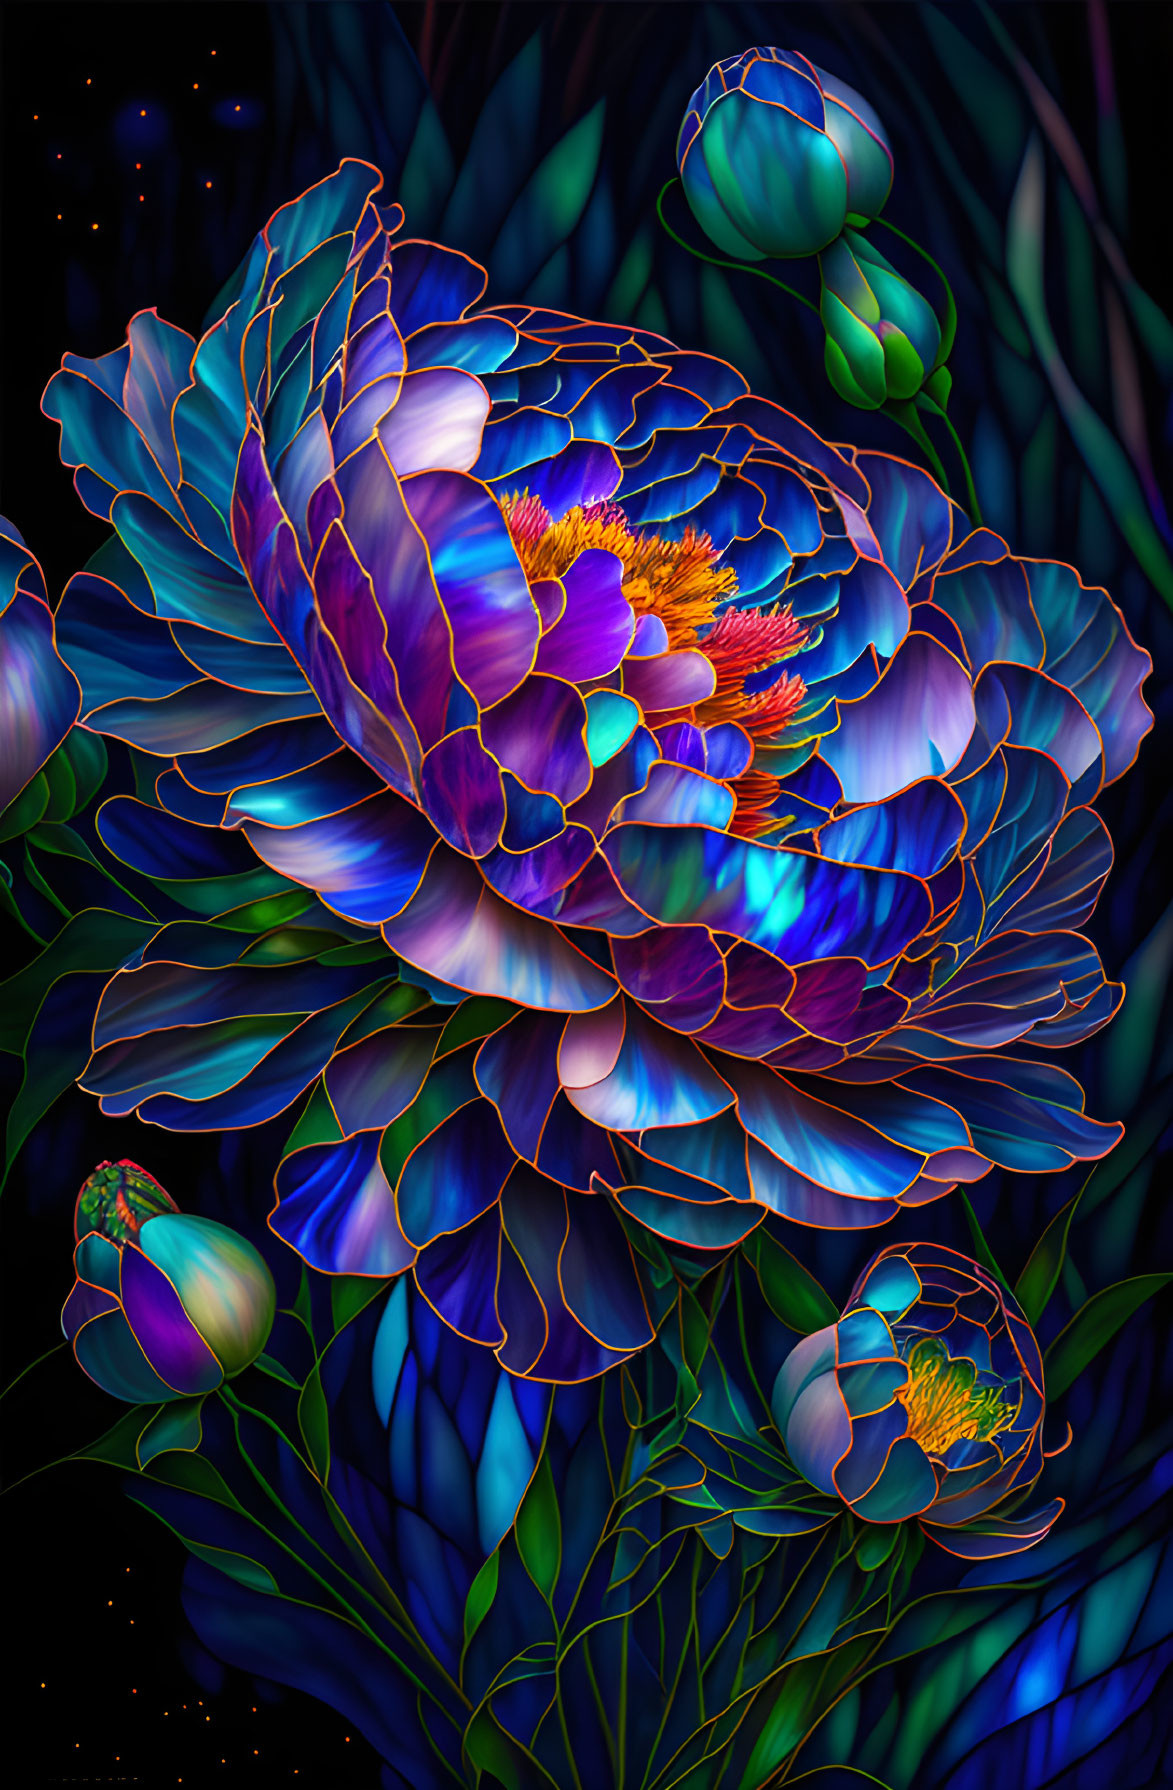 Luminescent Peony Digital Art with Swirling Blue and Purple Petals